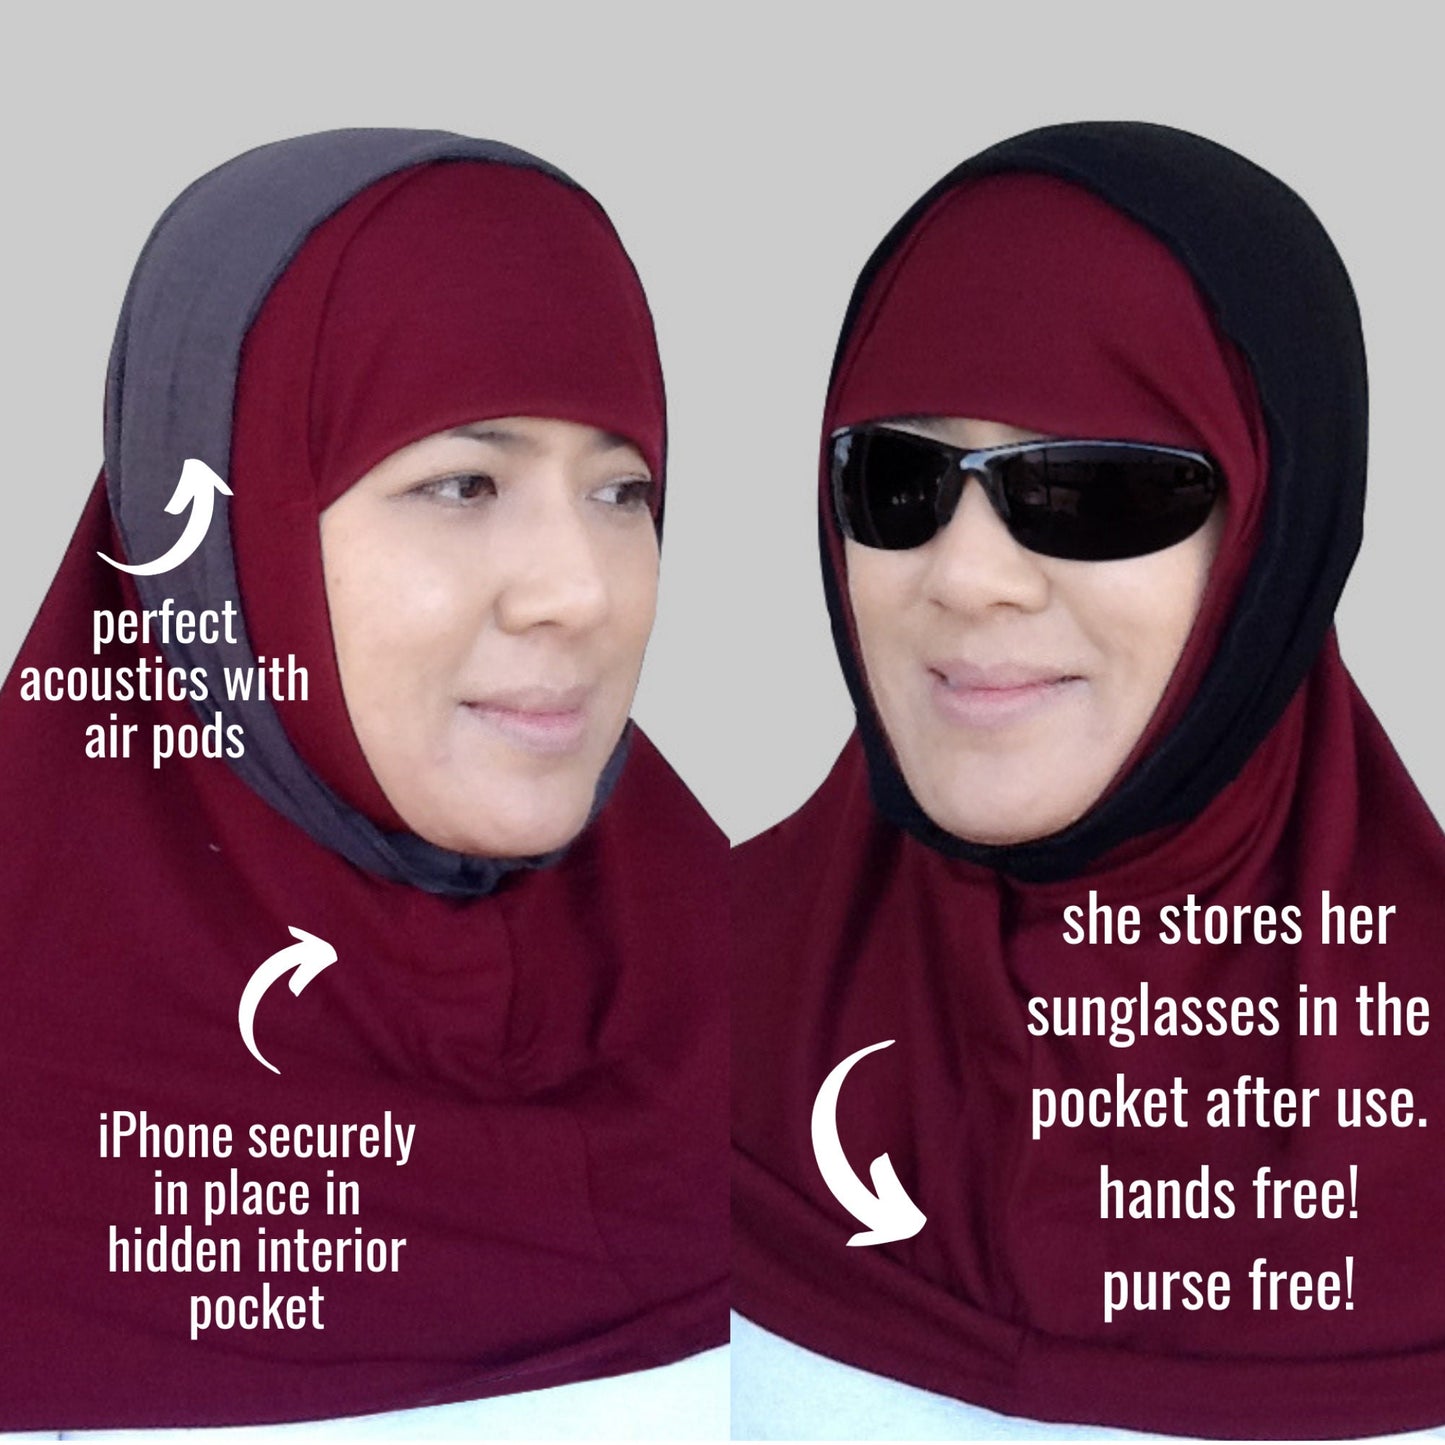 Hijab with Pocket, Hijab for Bluetooth, Hijab for Face Masks, Hijab for Airpods, Hijab for Hearing Aids, Hijab for Glasses, Exercise Hijab,